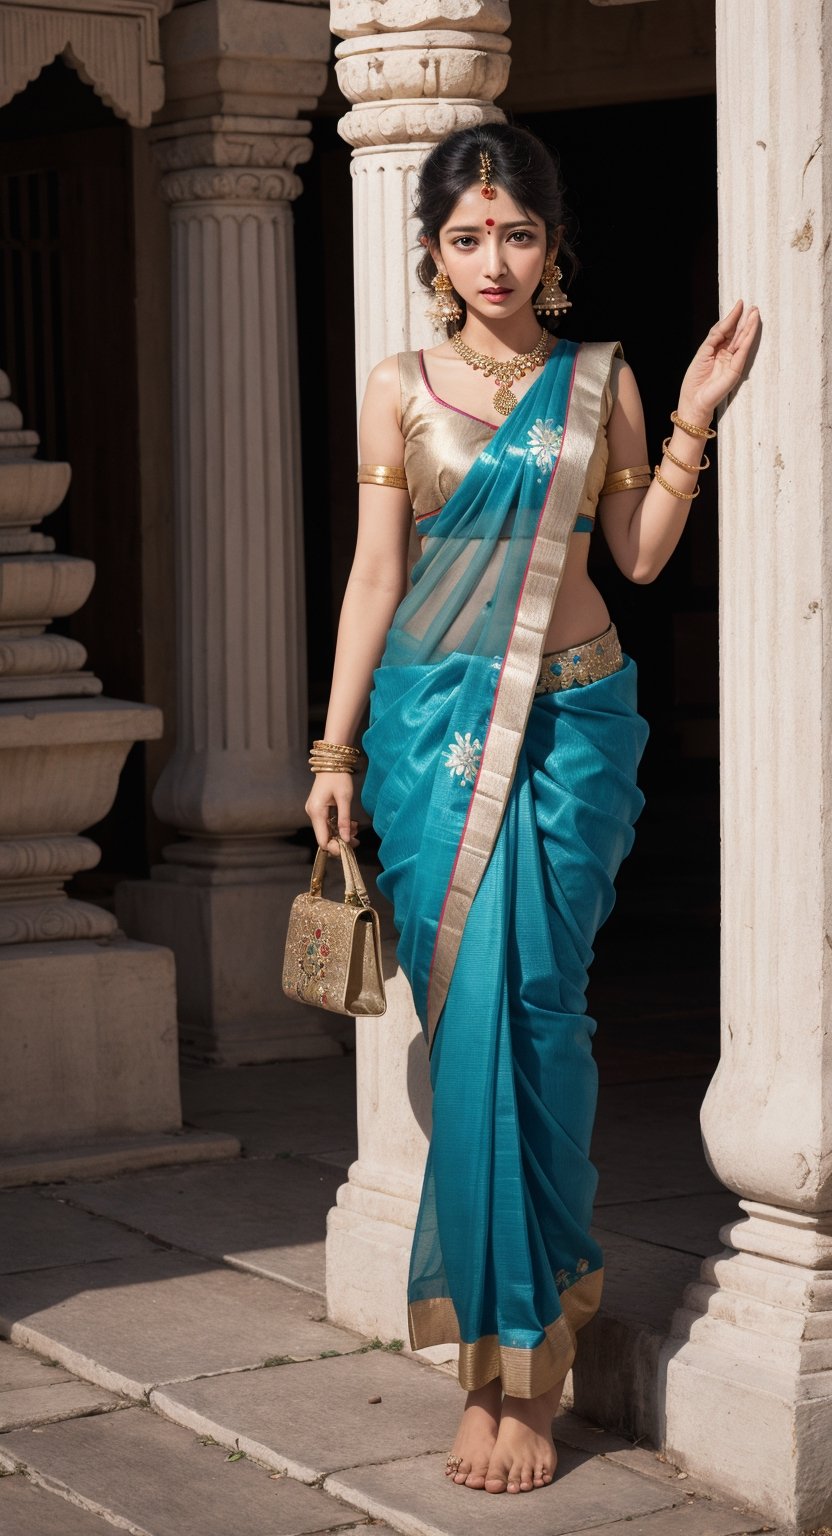 Saree, extremely tall, looking at observer, indian temple background, Goddess, Jewellery, Handbag, Bangles, Necklace, earrings, anklet, soft facial makeup, perfect hands and feet, b3ltsbodyng, after sex,